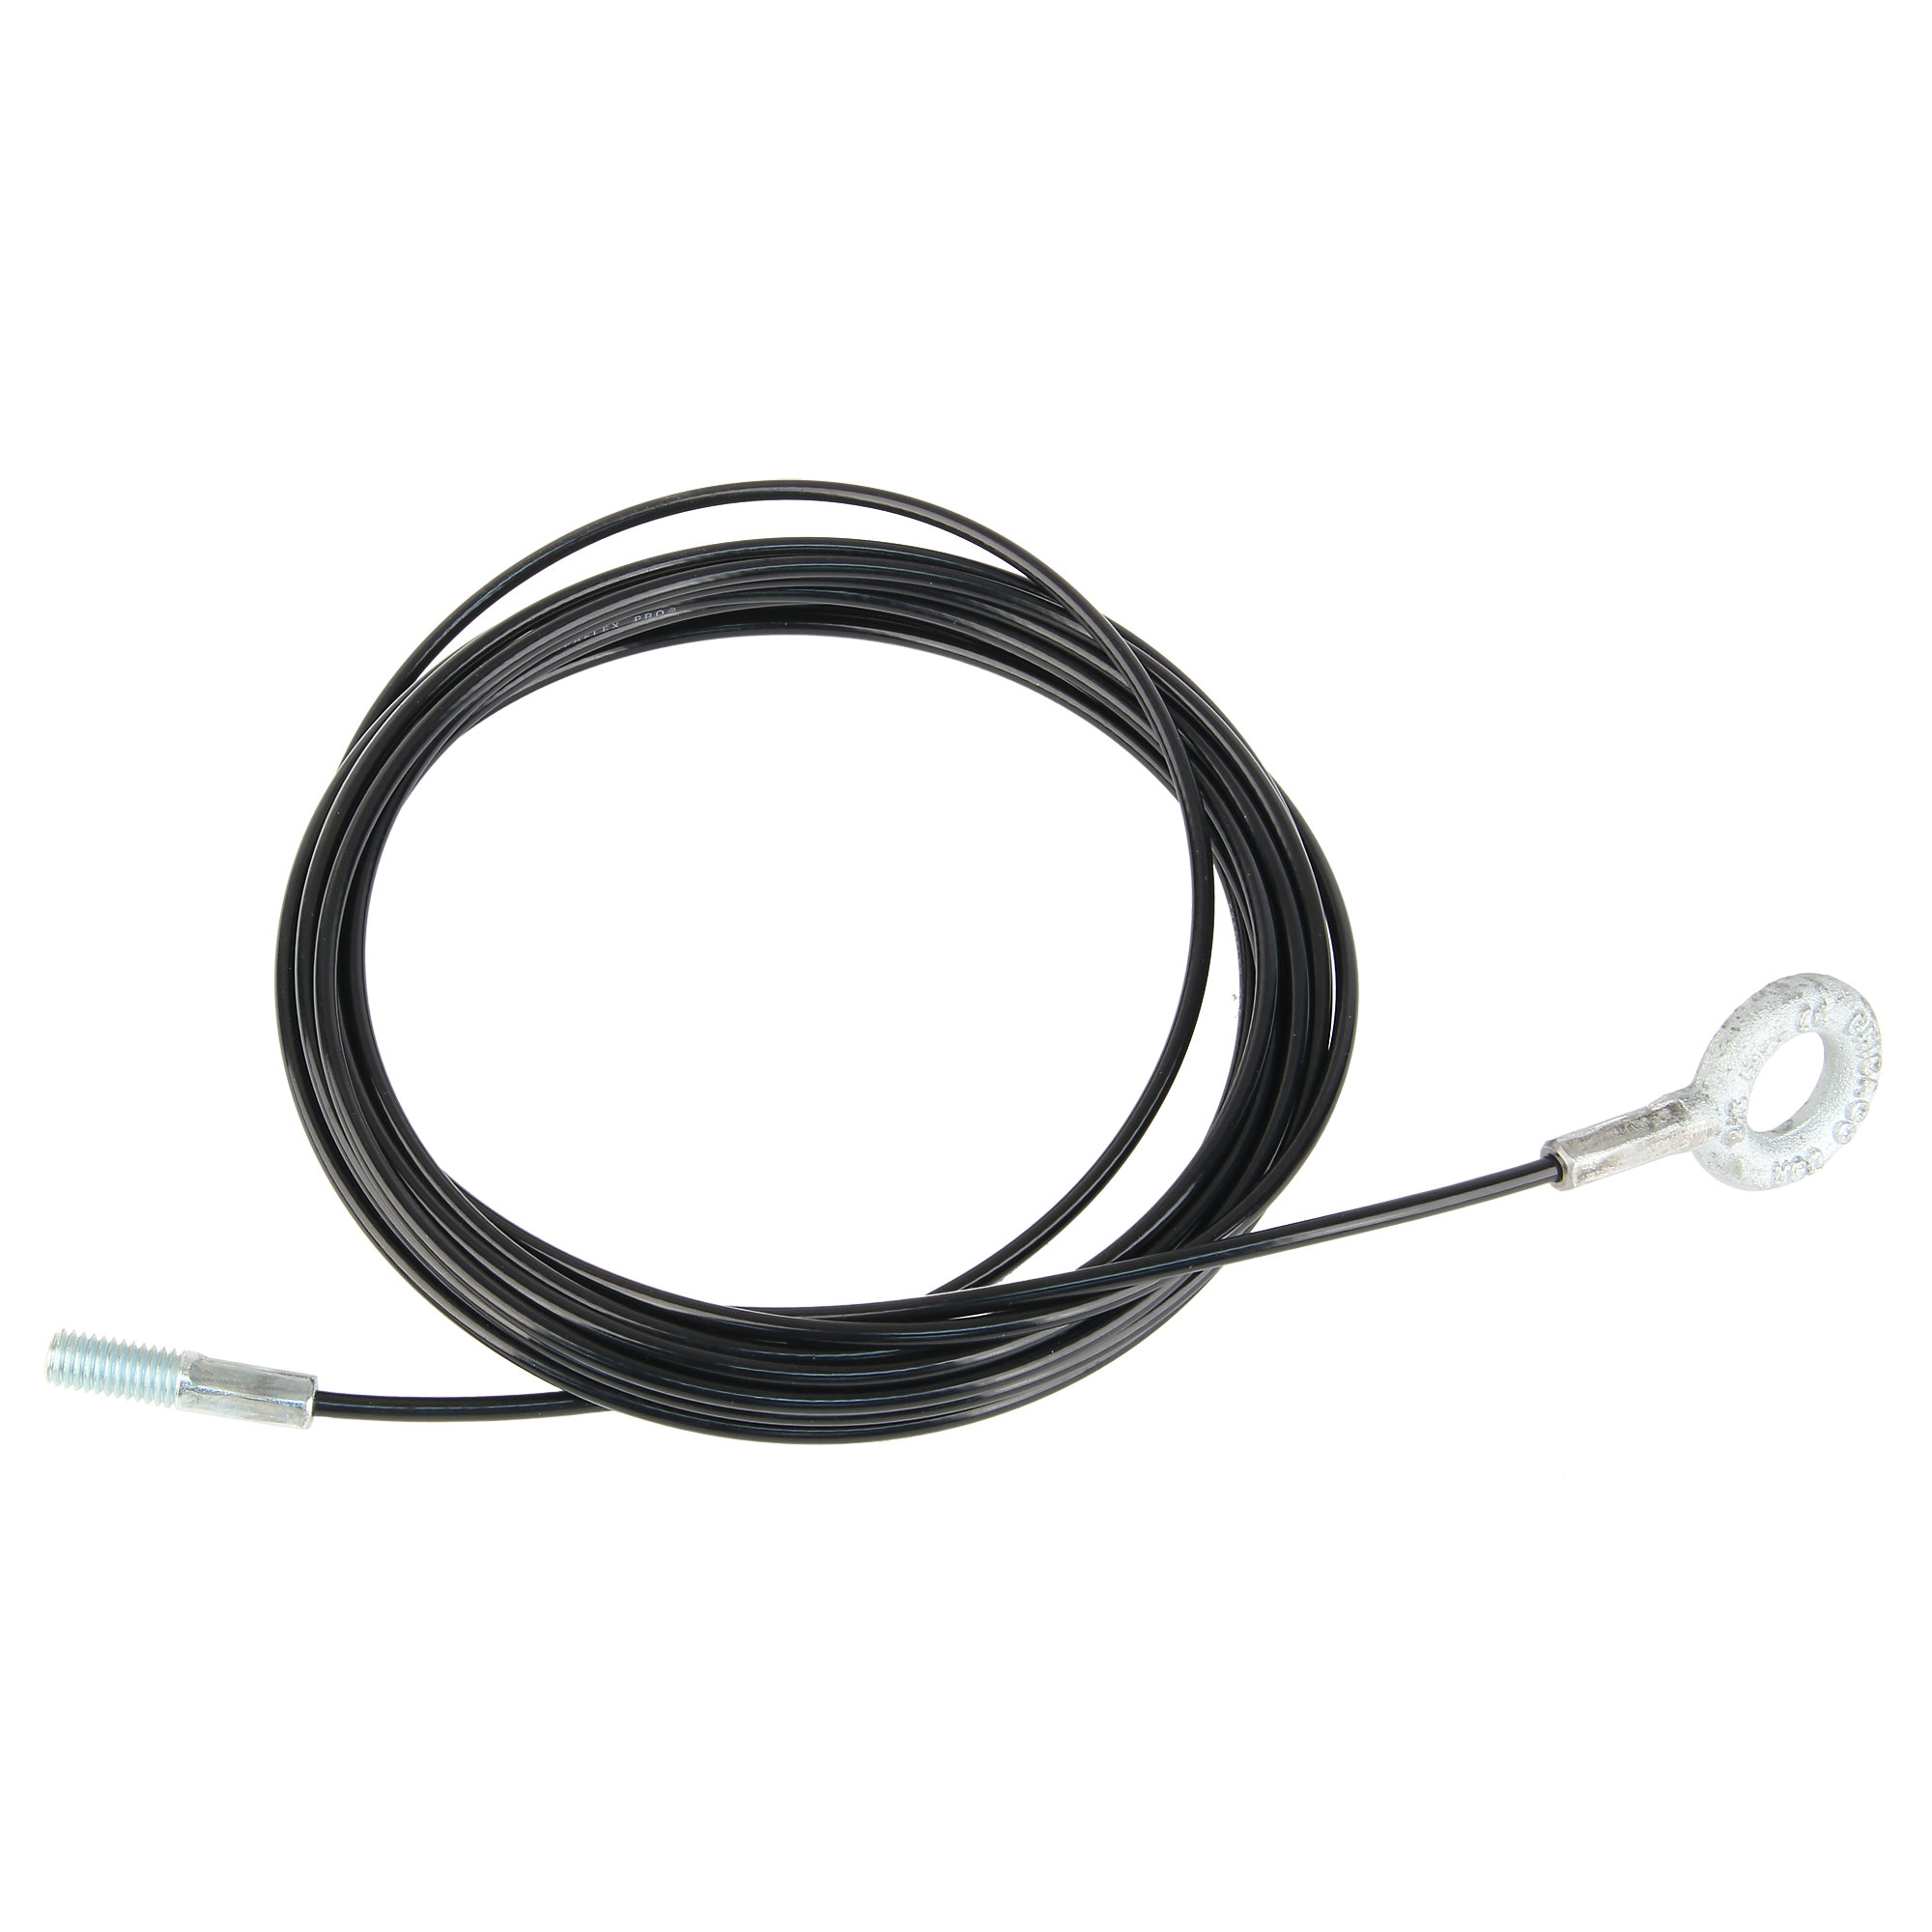 Cable for certain Strength Machines by Cybex 18000-002